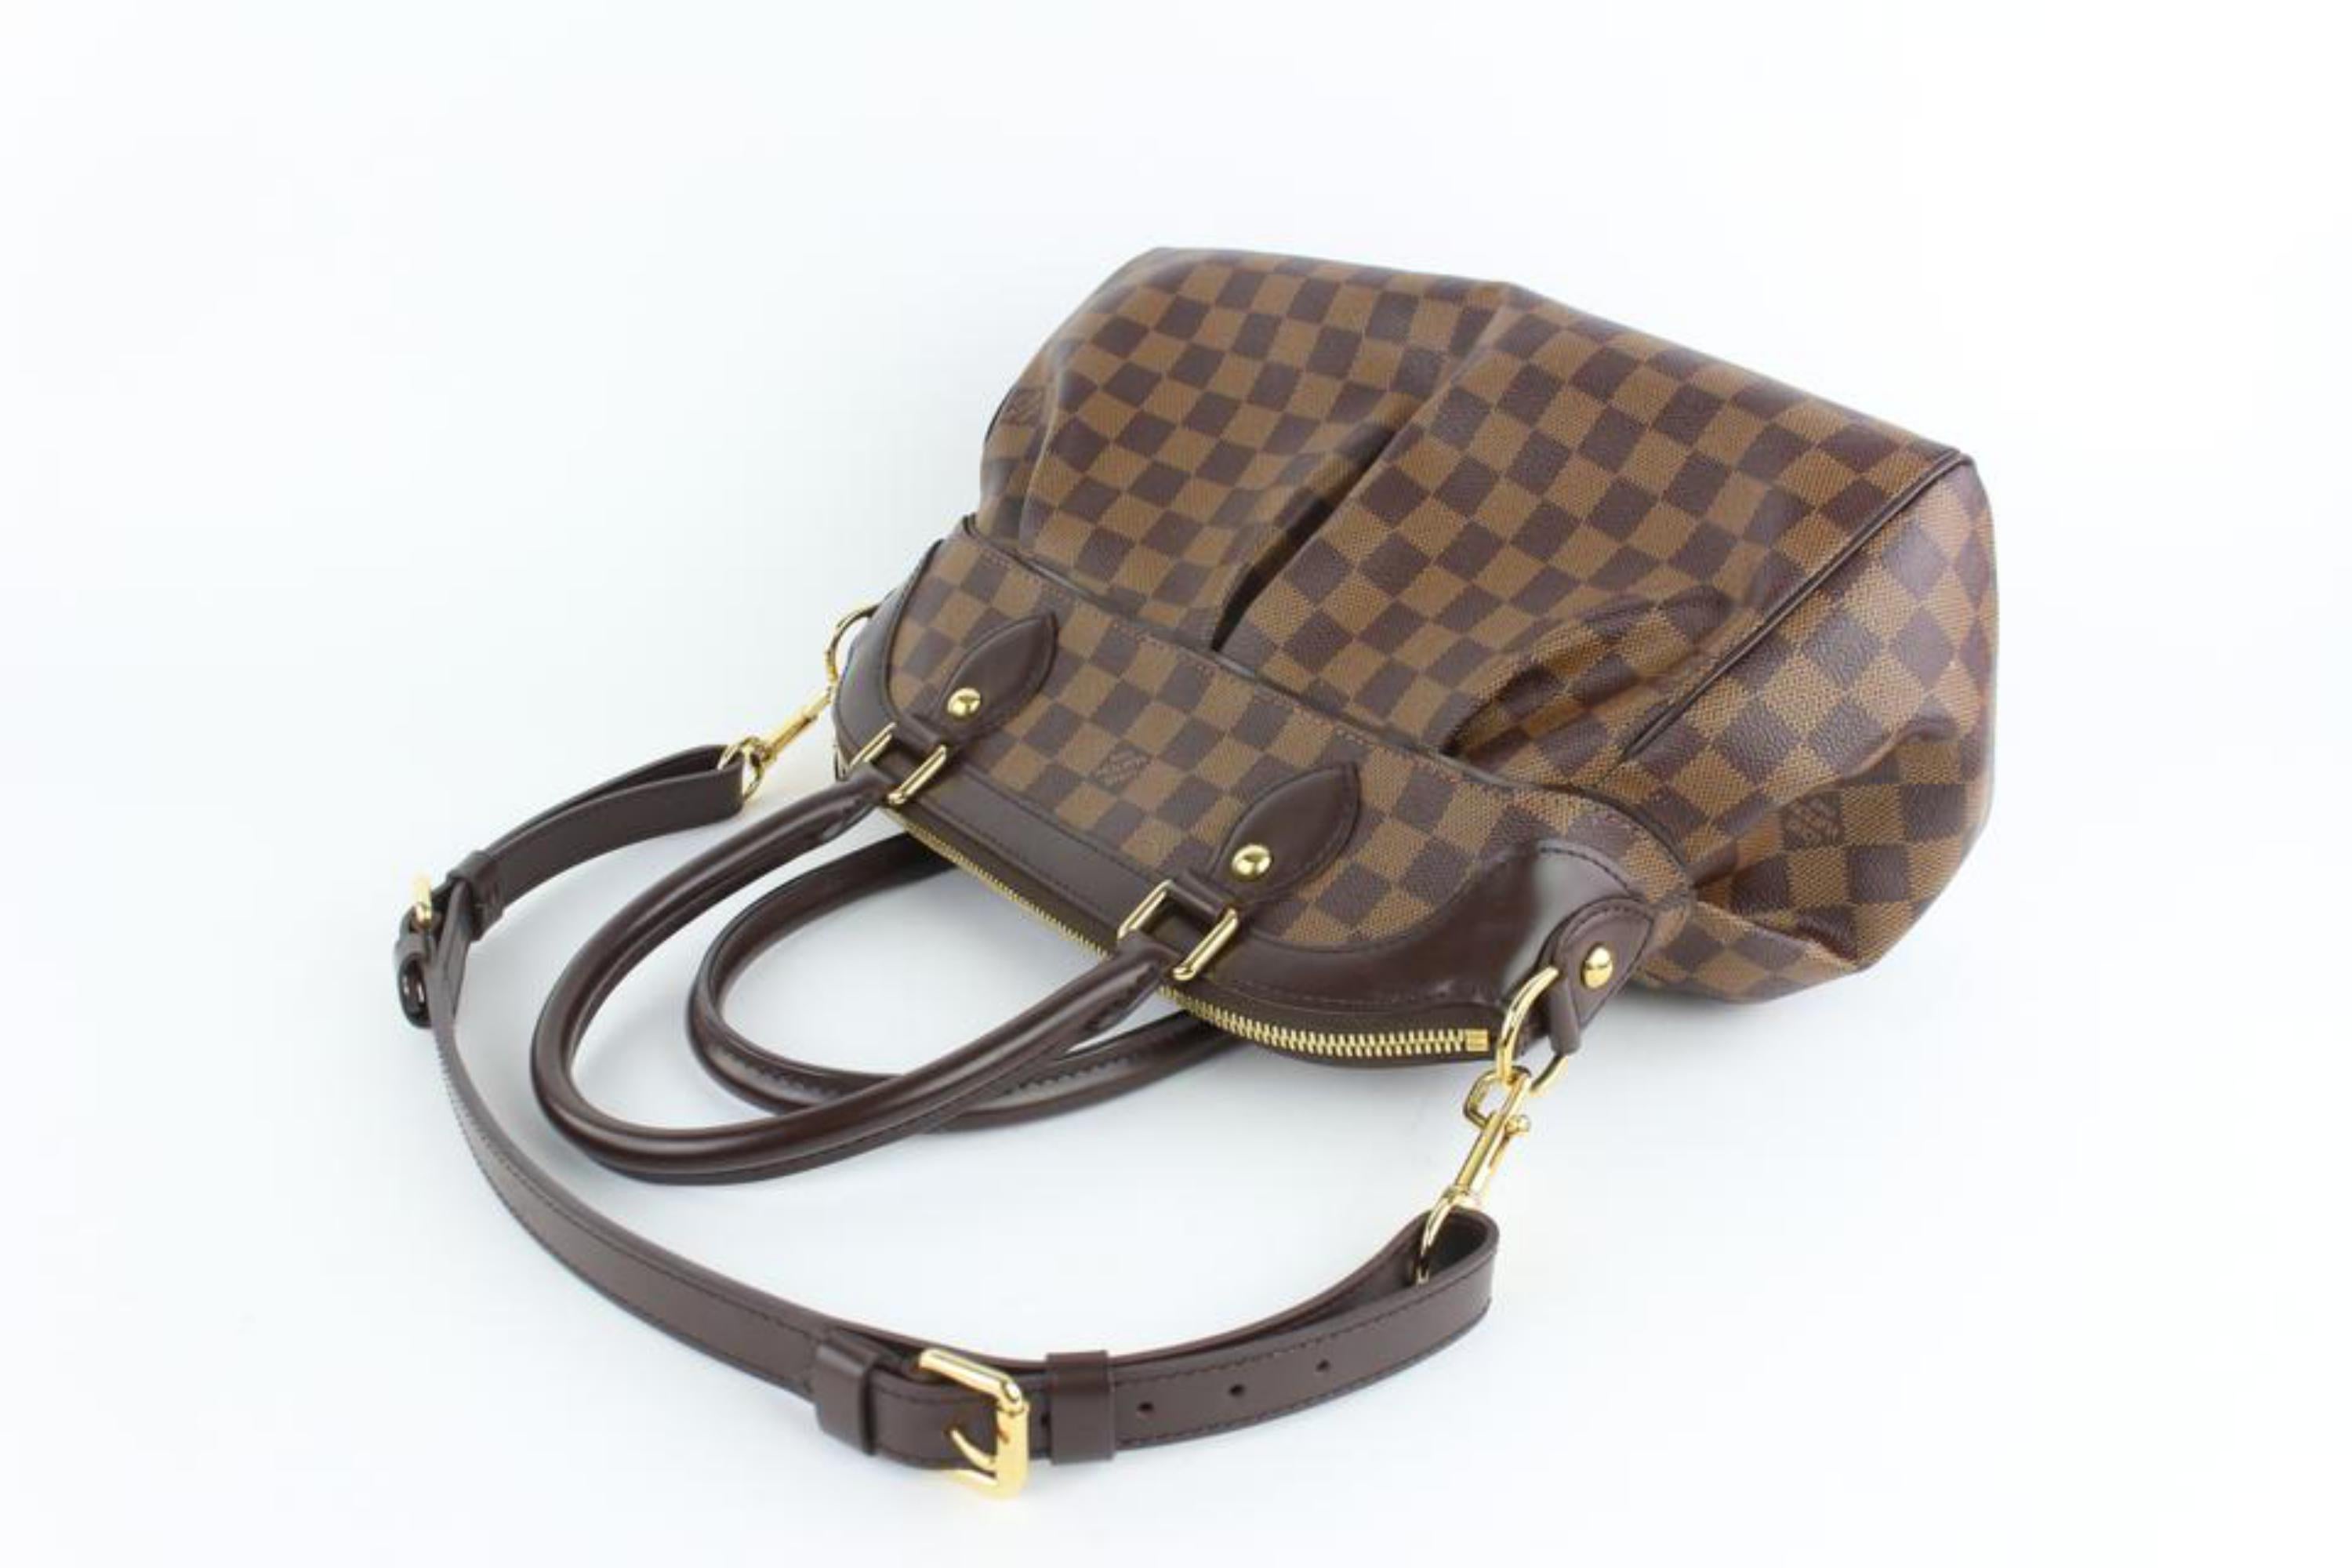 Louis Vuitton Trevi Damier Ebene Pm 2way 19lz1012 Coated Canvas Shoulder Bag In Excellent Condition For Sale In Forest Hills, NY